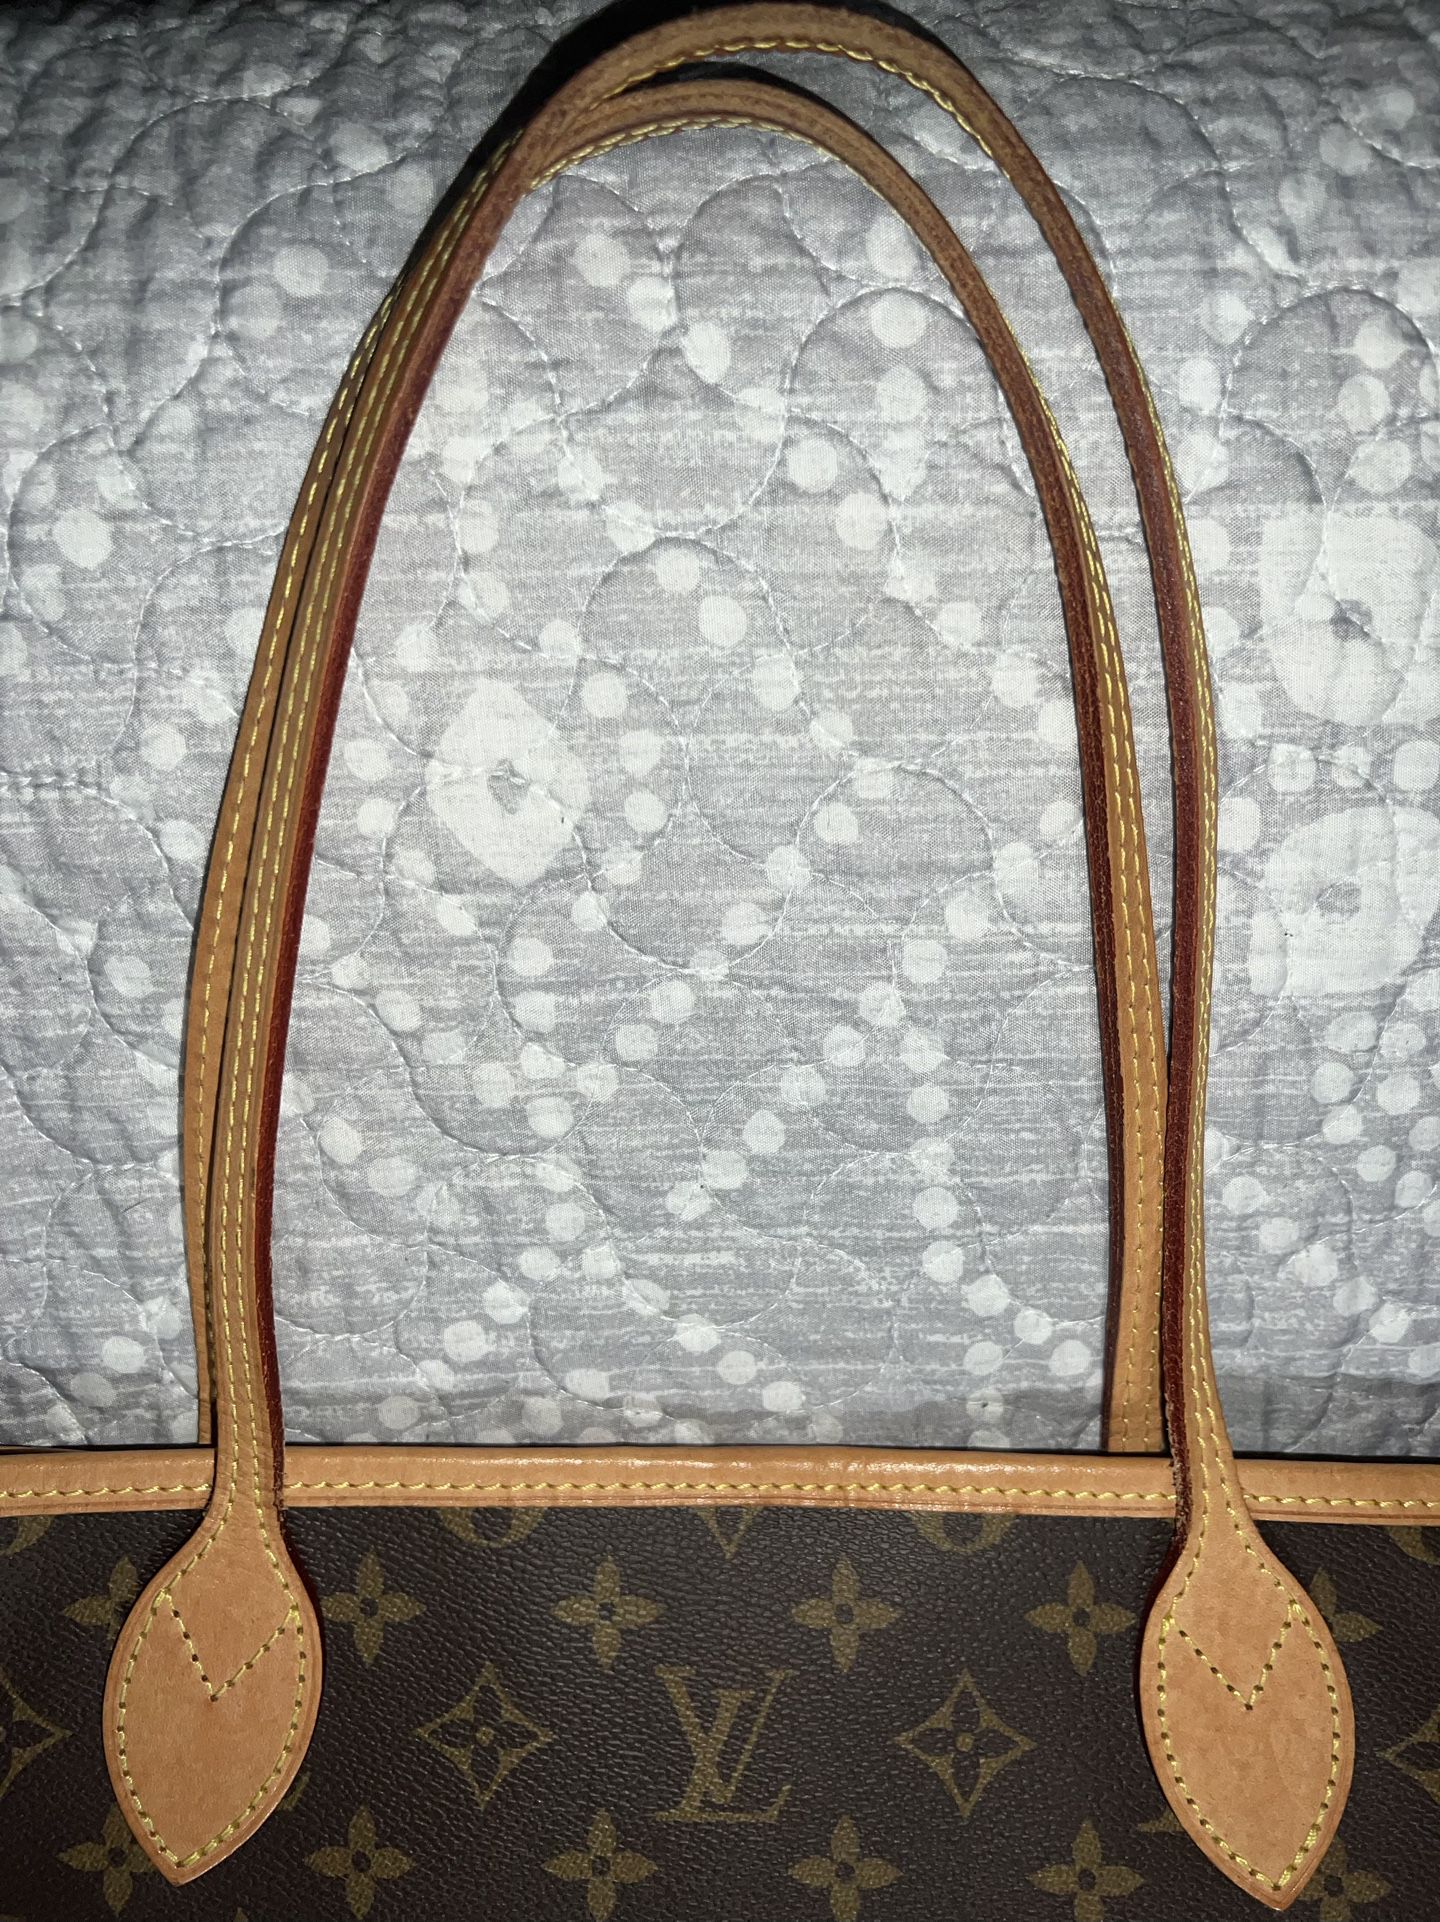 Louis Vuitton Neverfull GM Tote for Sale in Honolulu, HI - OfferUp